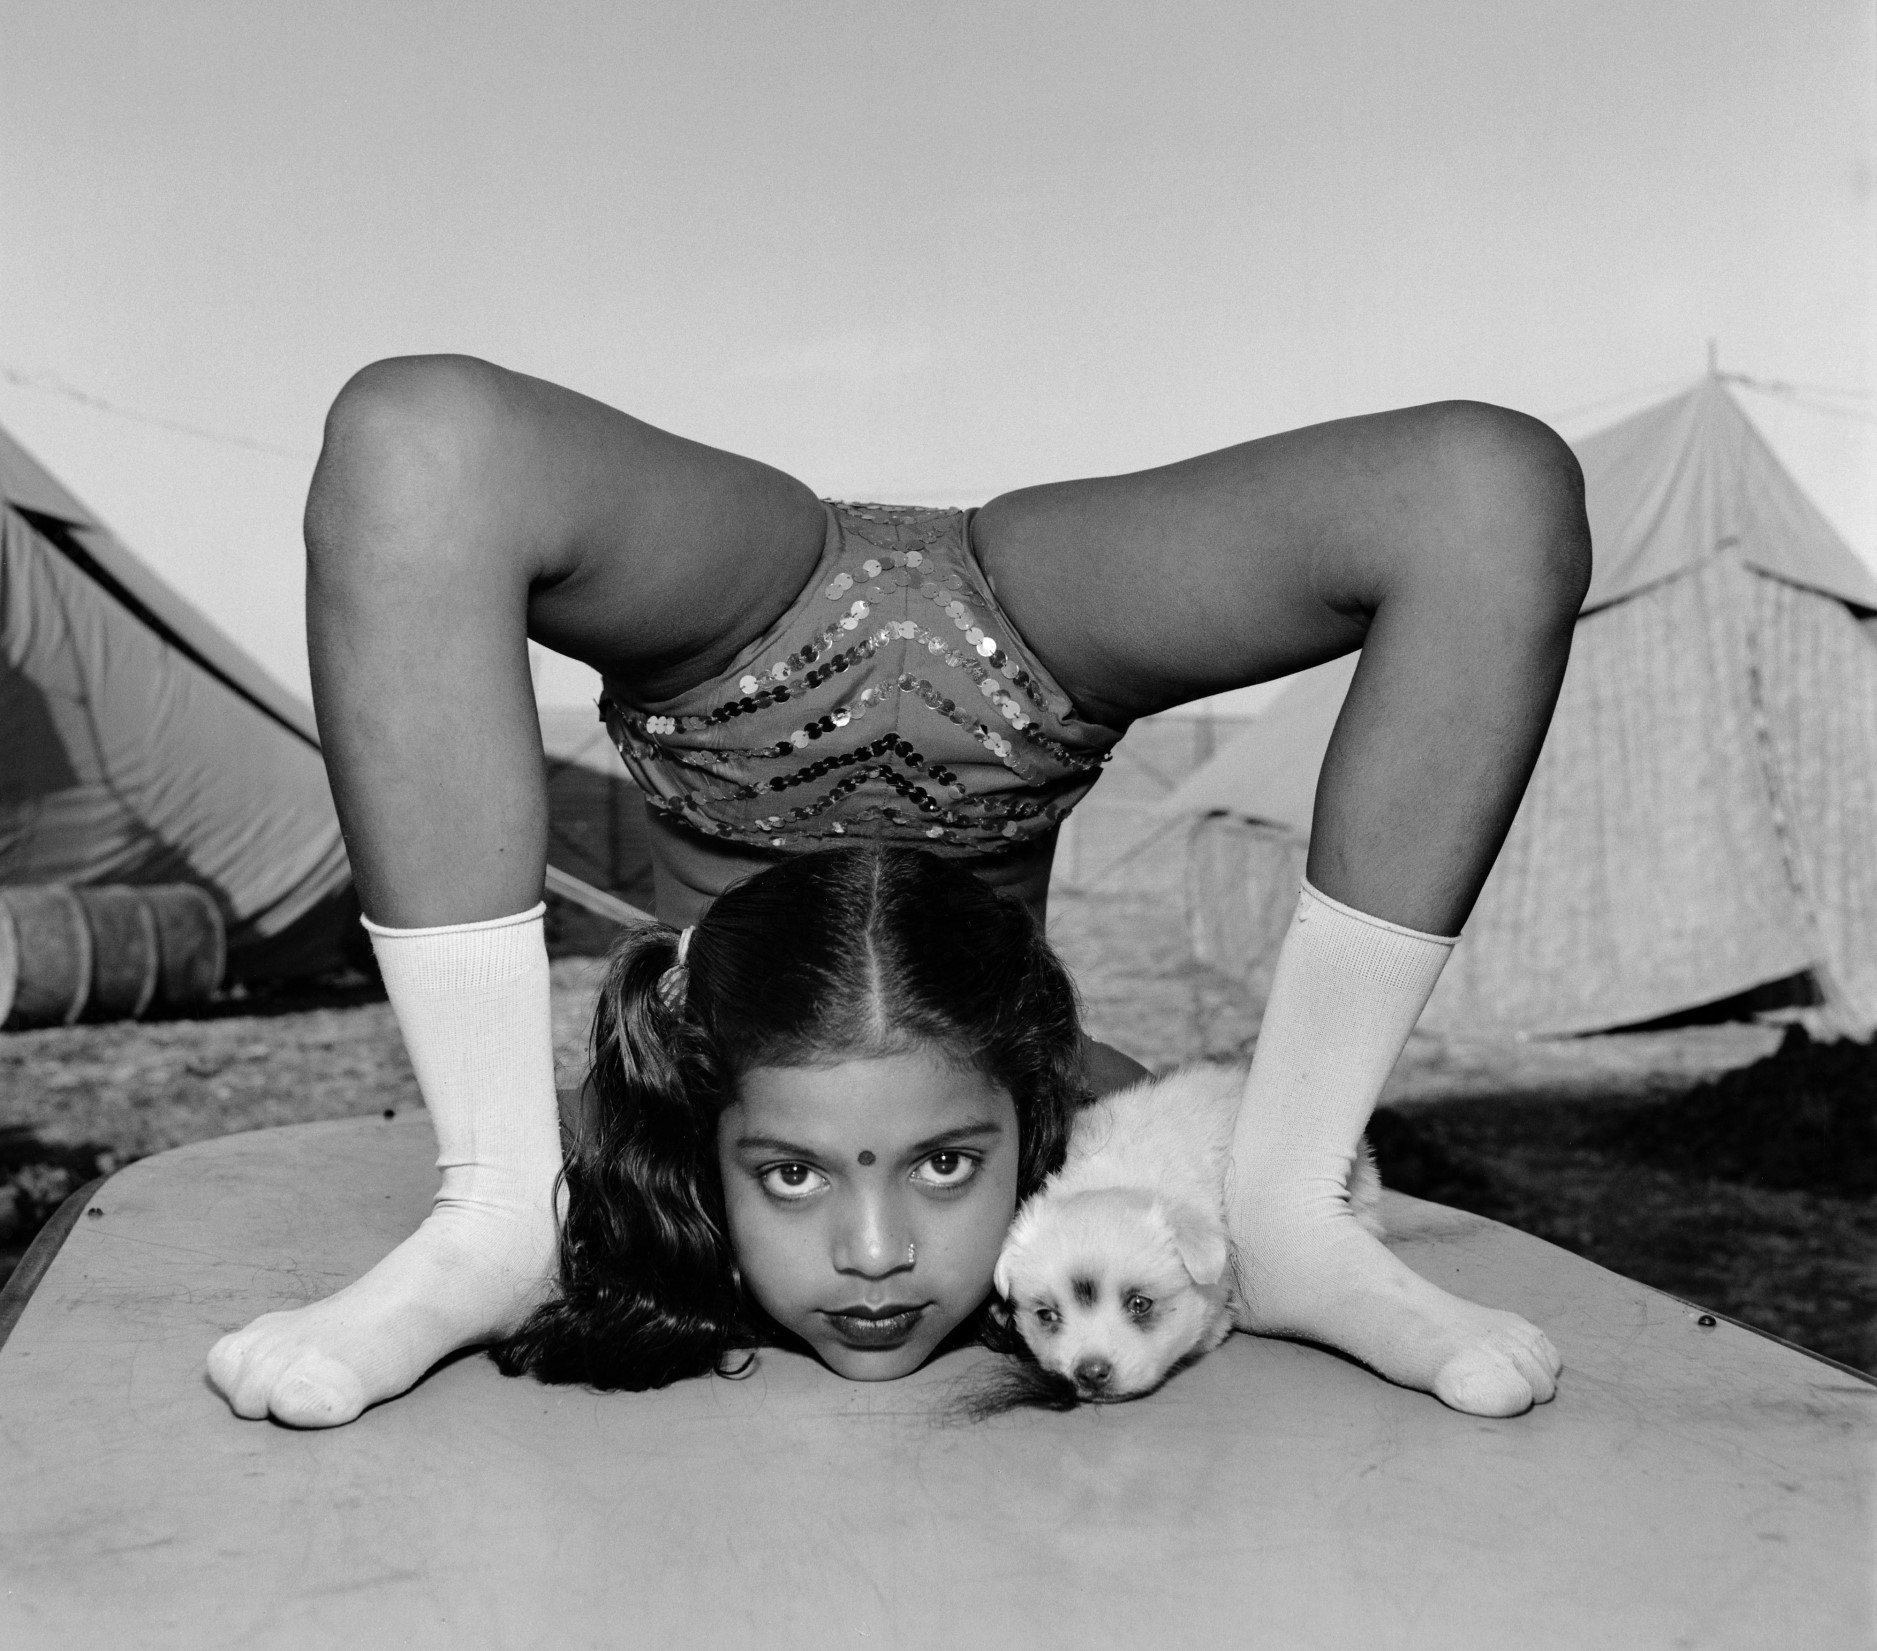 Contortionist with Sweety the Puppy © Mary Ellen Mark, Courtesy of The Mary Ellen Mark Foundation and Howard Greenberg